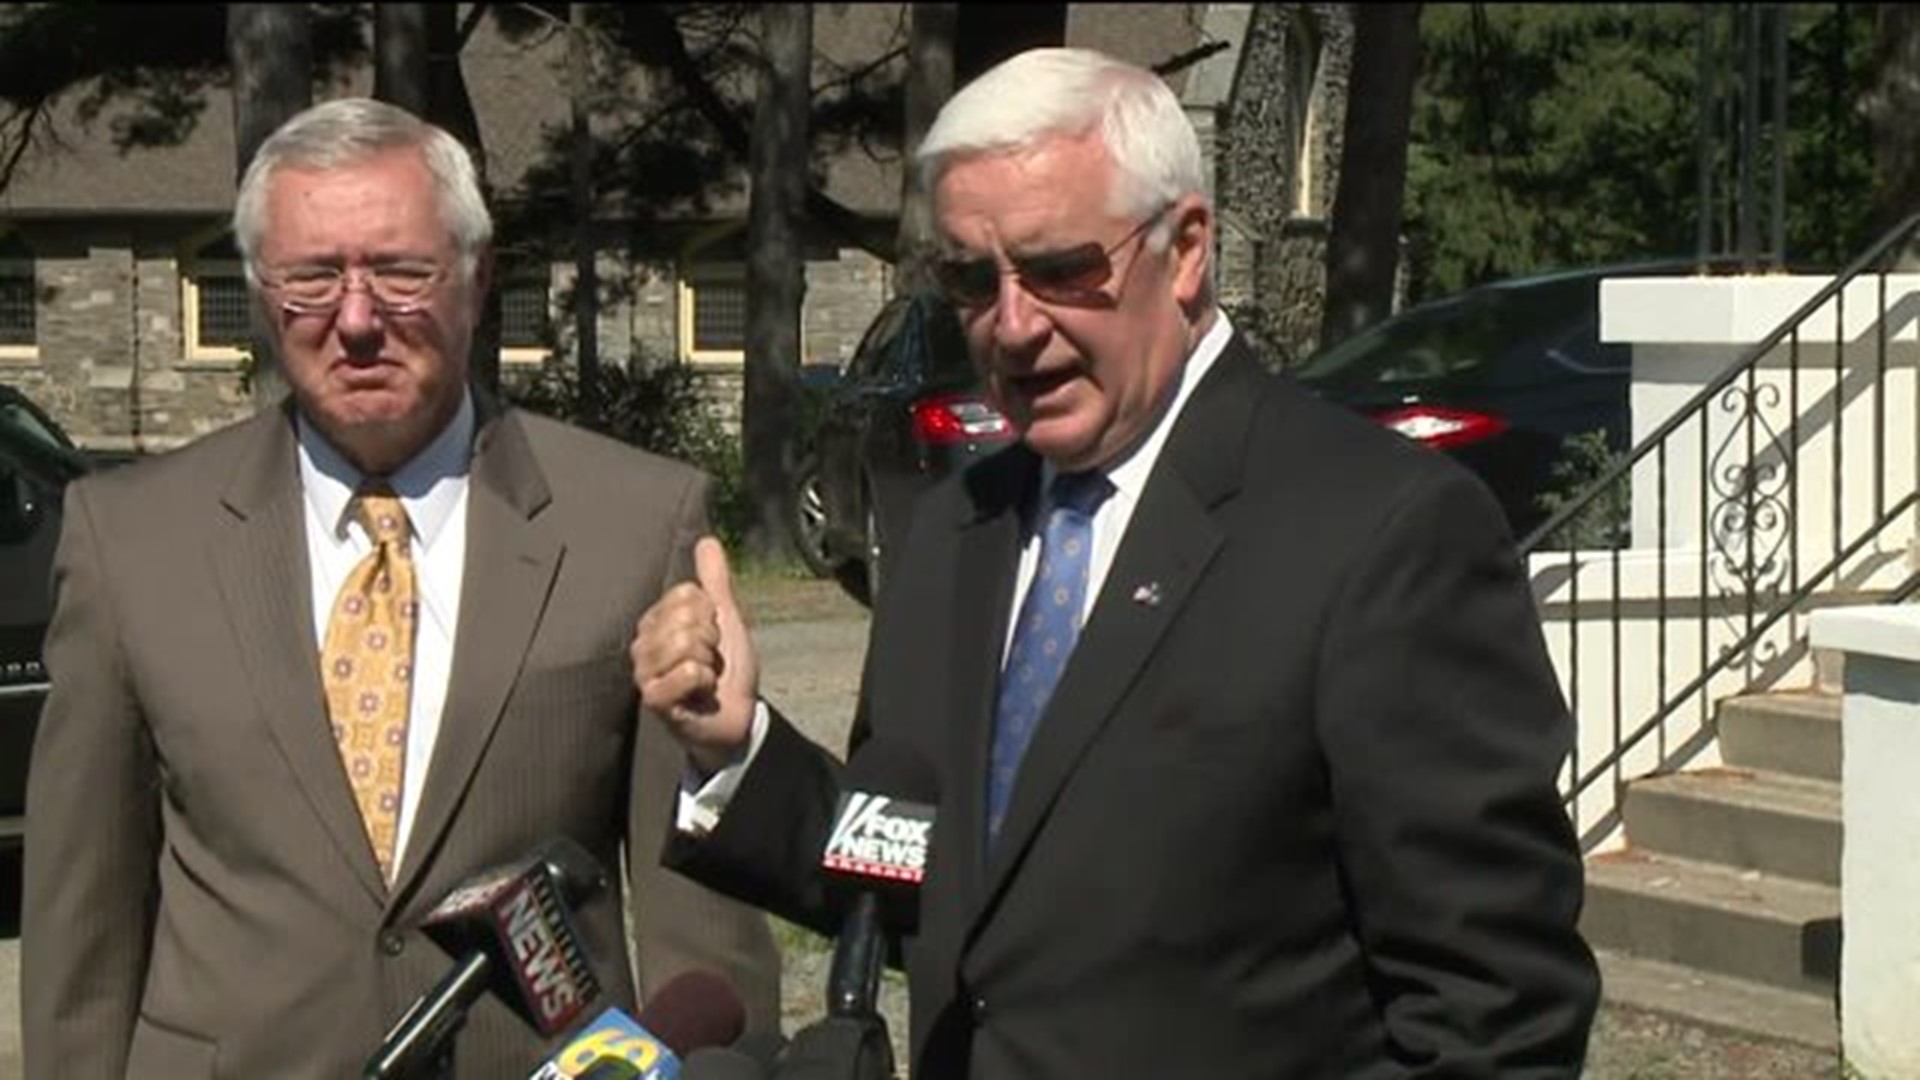 Gov. Corbett makes statement on PA State Police ambushed over the weekend